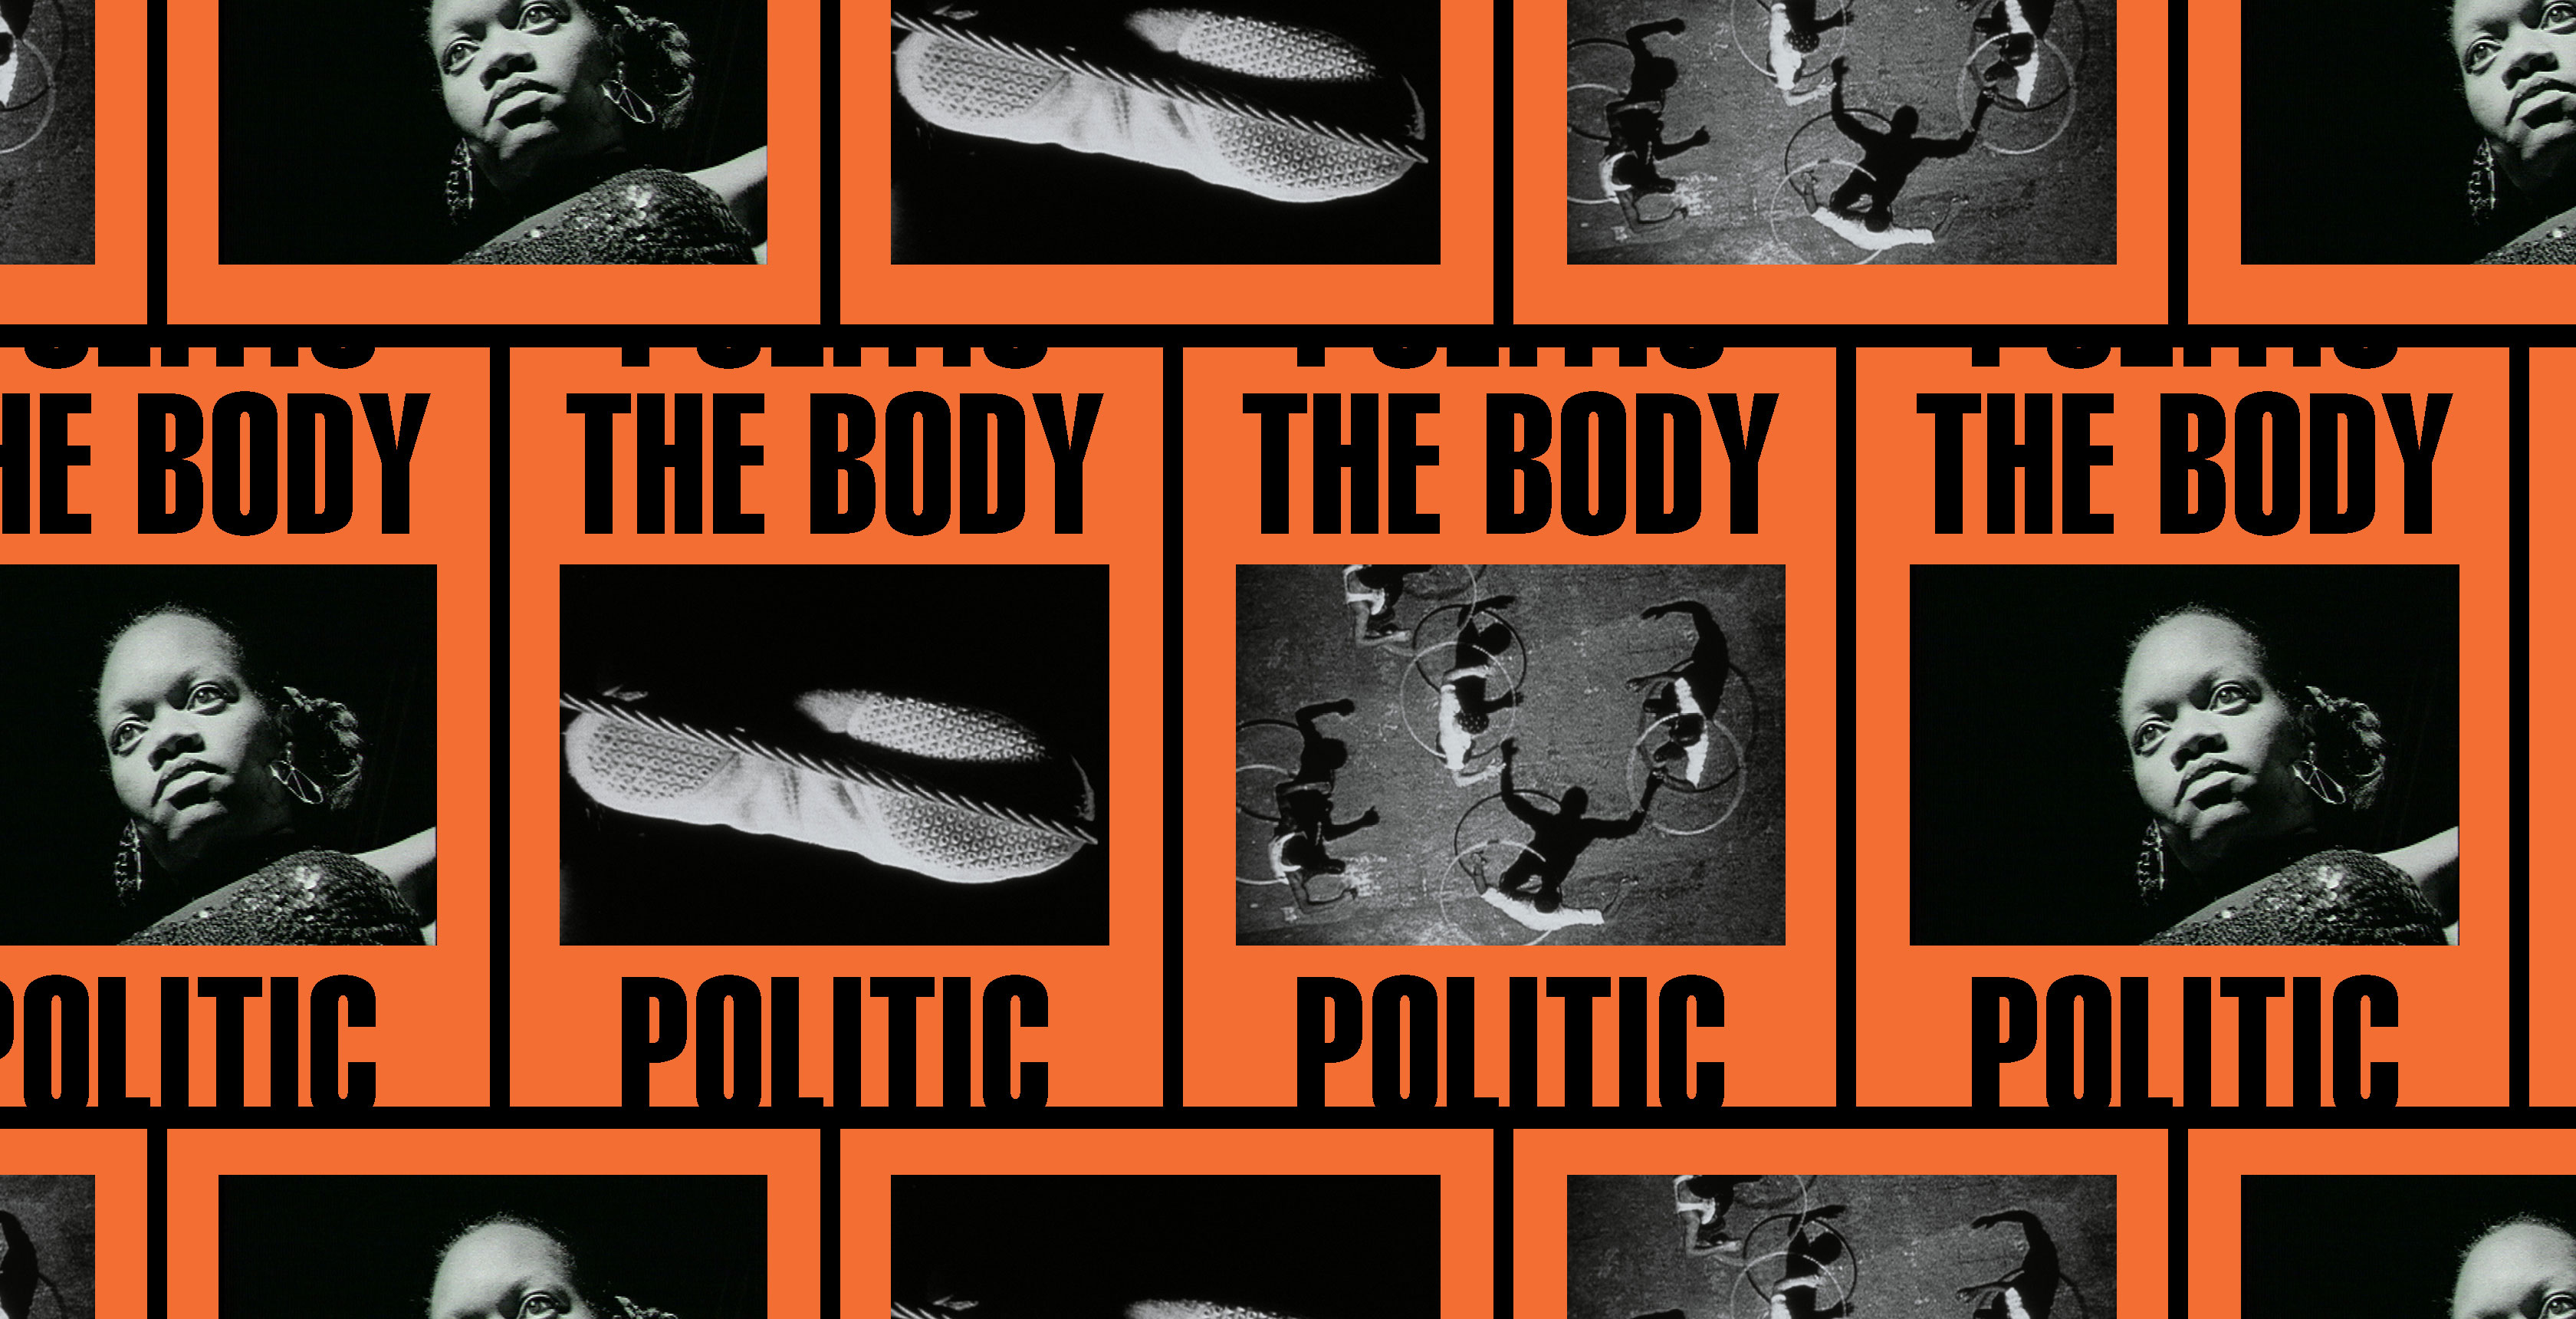 The Body Politic by Howard Tayler